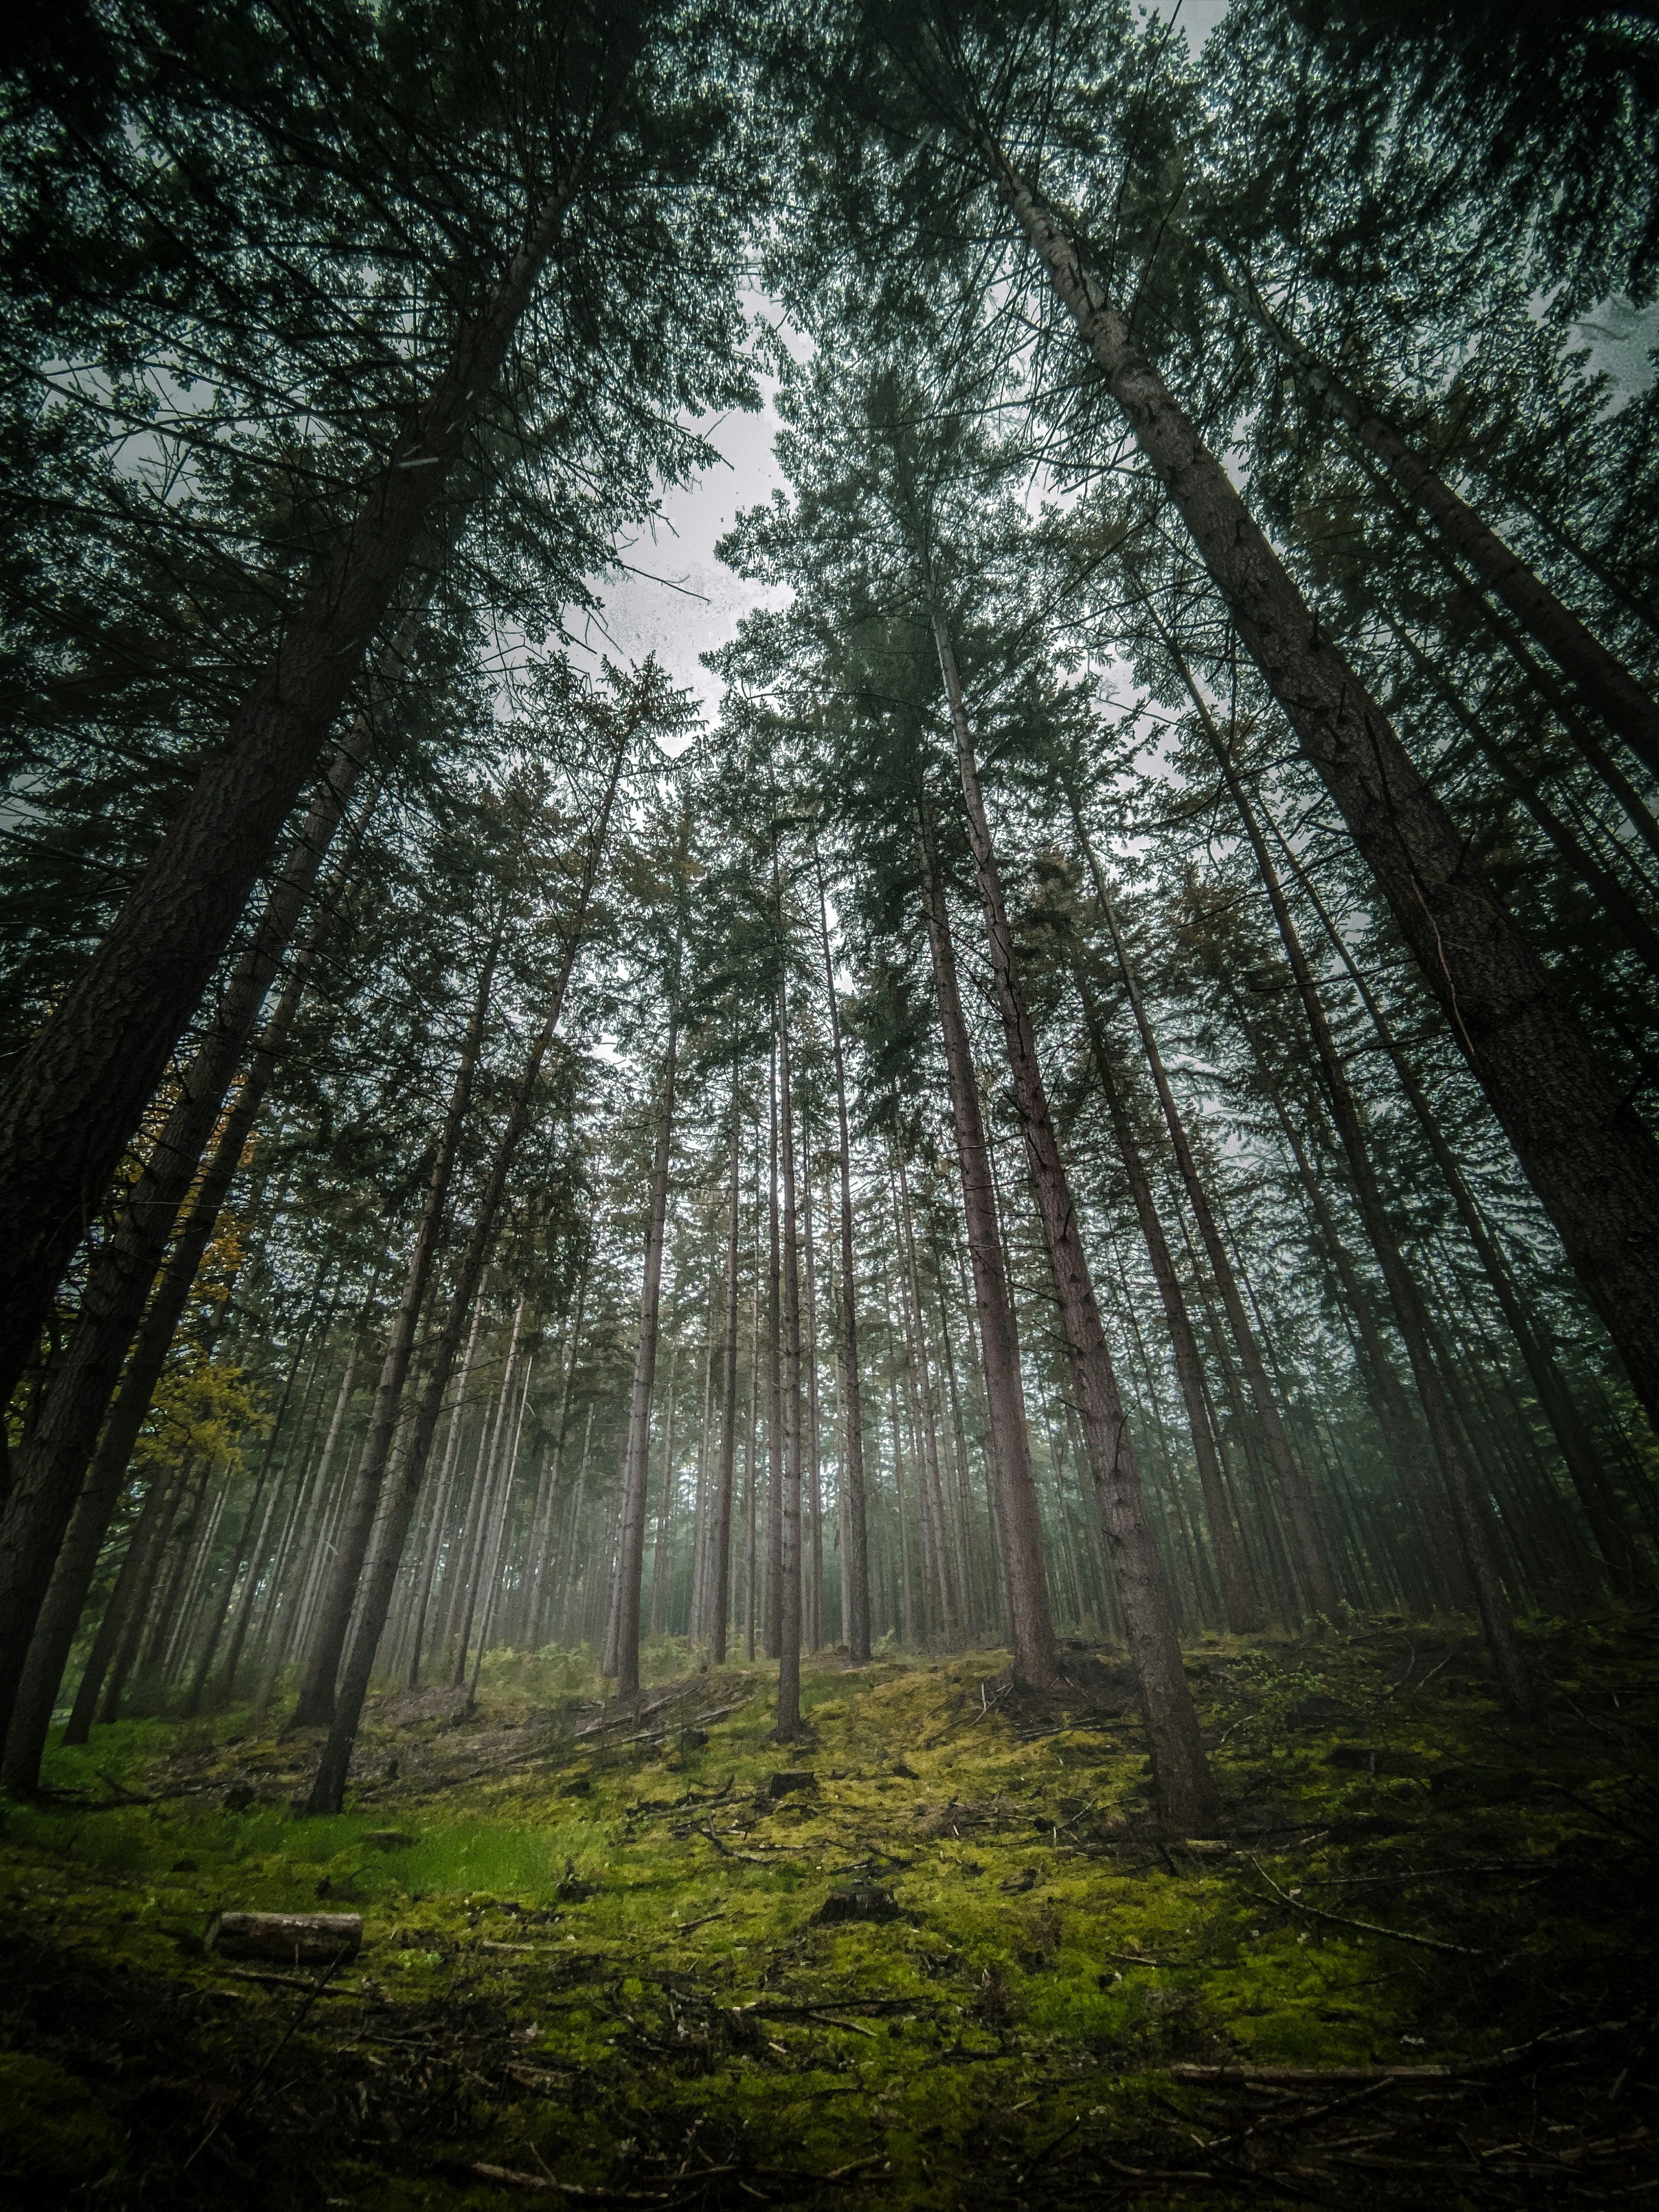 Misty morning in a mossy forest.